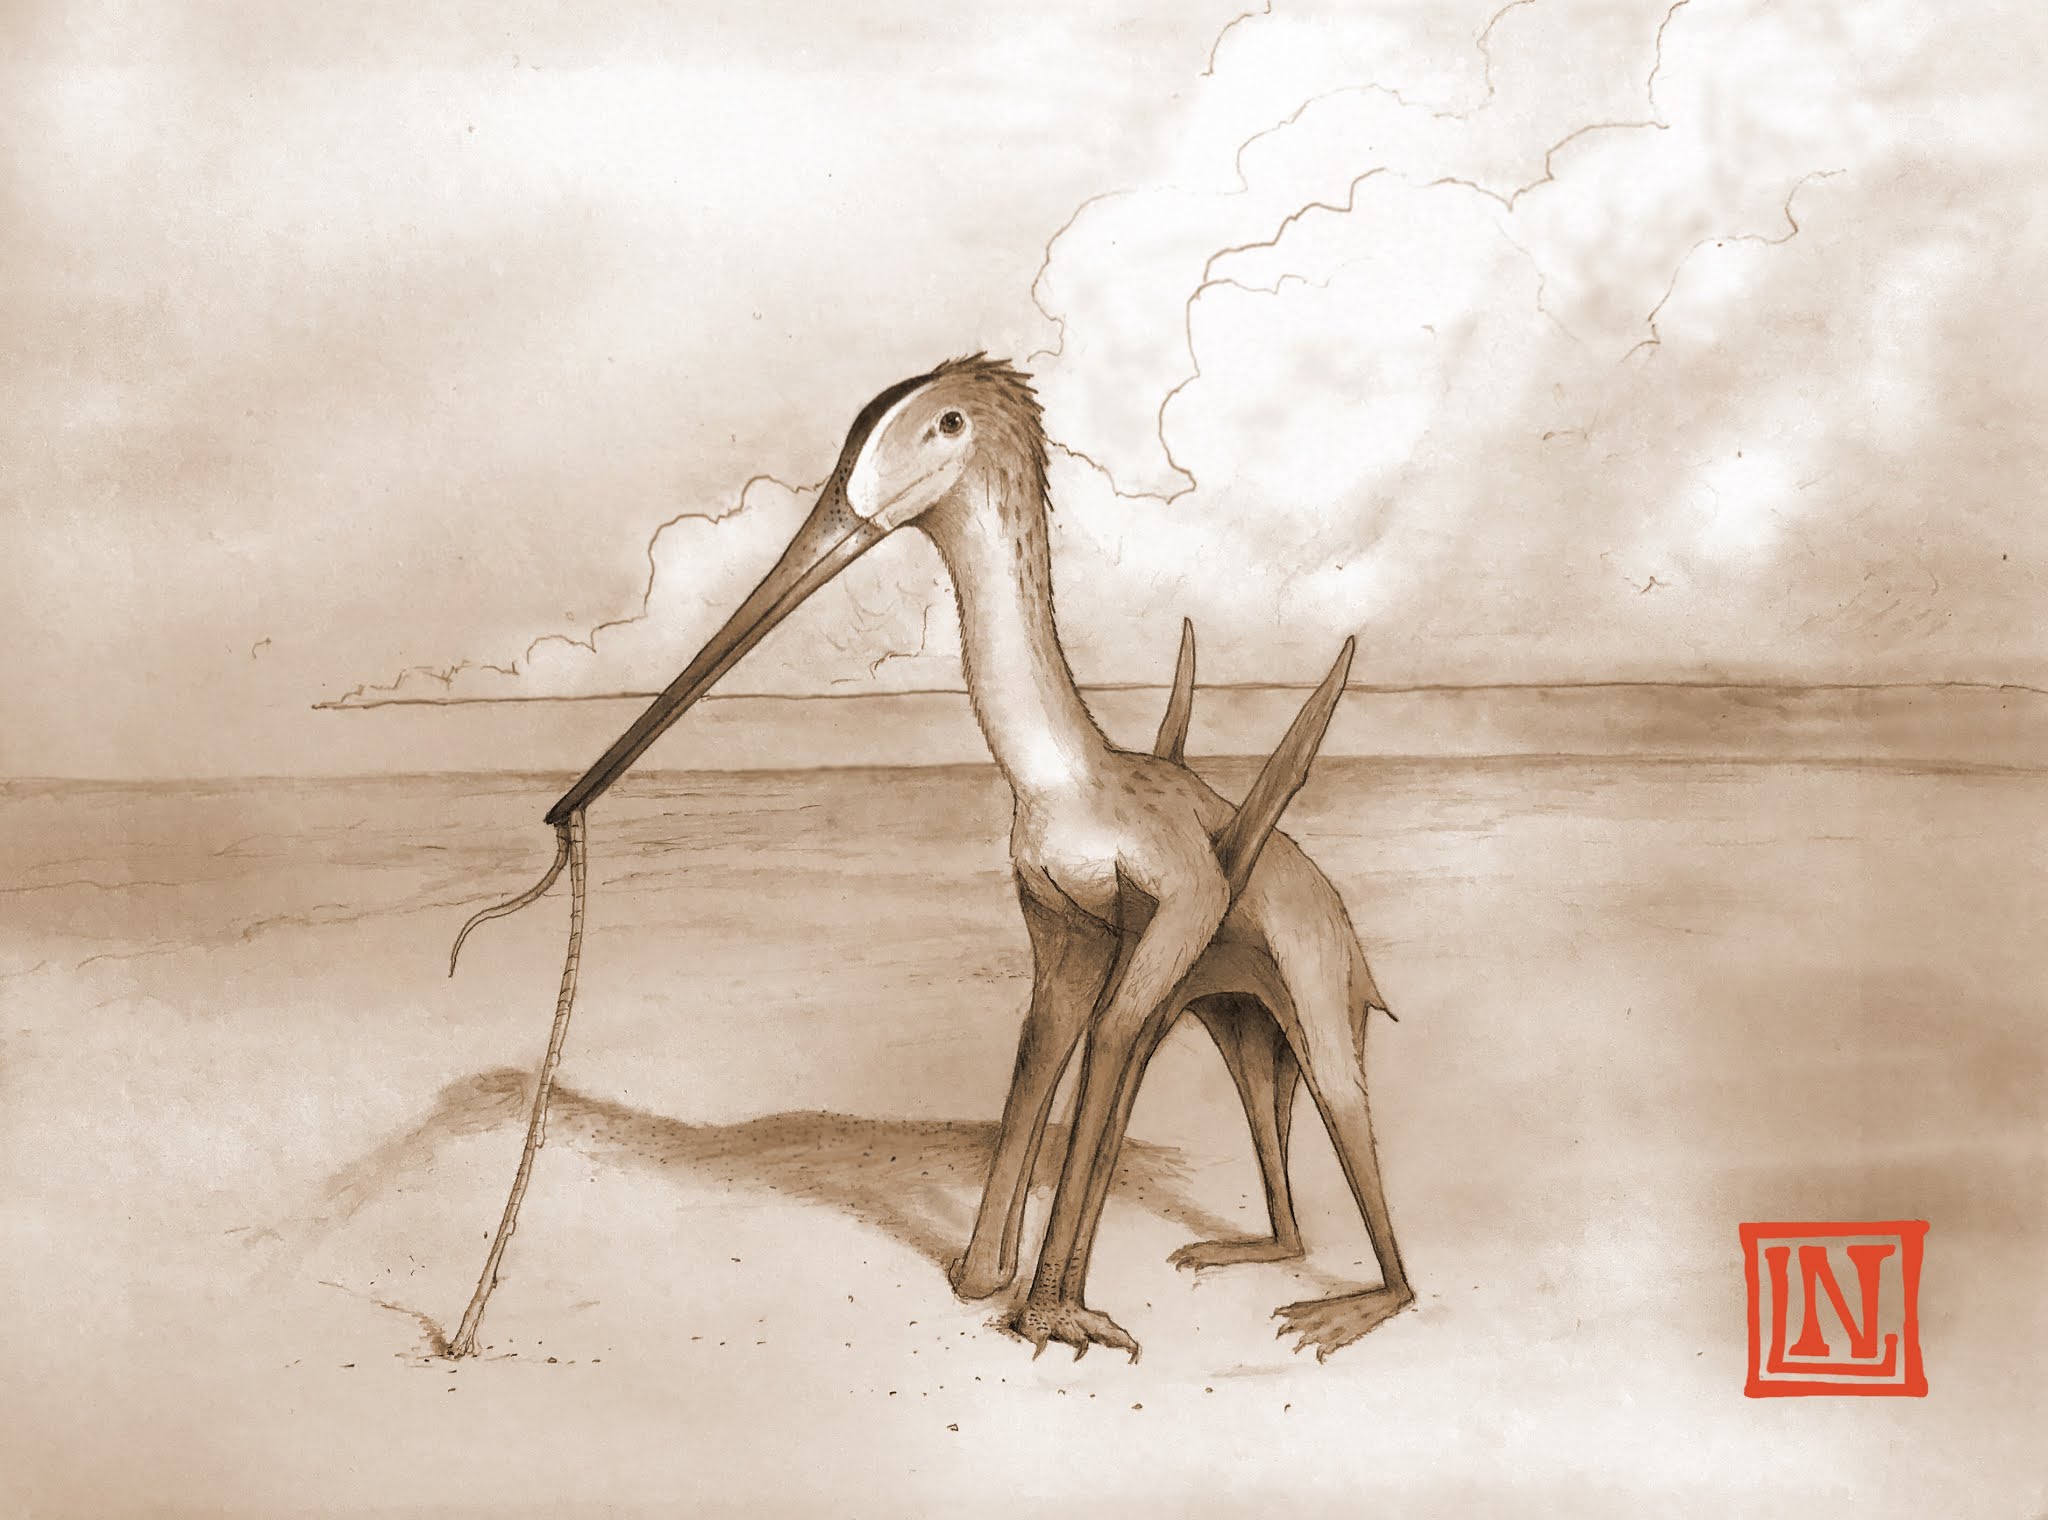 Species New to Science: [Paleontology • 2021] Leptostomia begaaensis • A  Long-billed, Possible Probe-feeding Pterosaur (Pterodactyloidea:  ?Azhdarchoidea) from the mid-Cretaceous of Morocco, North Africa